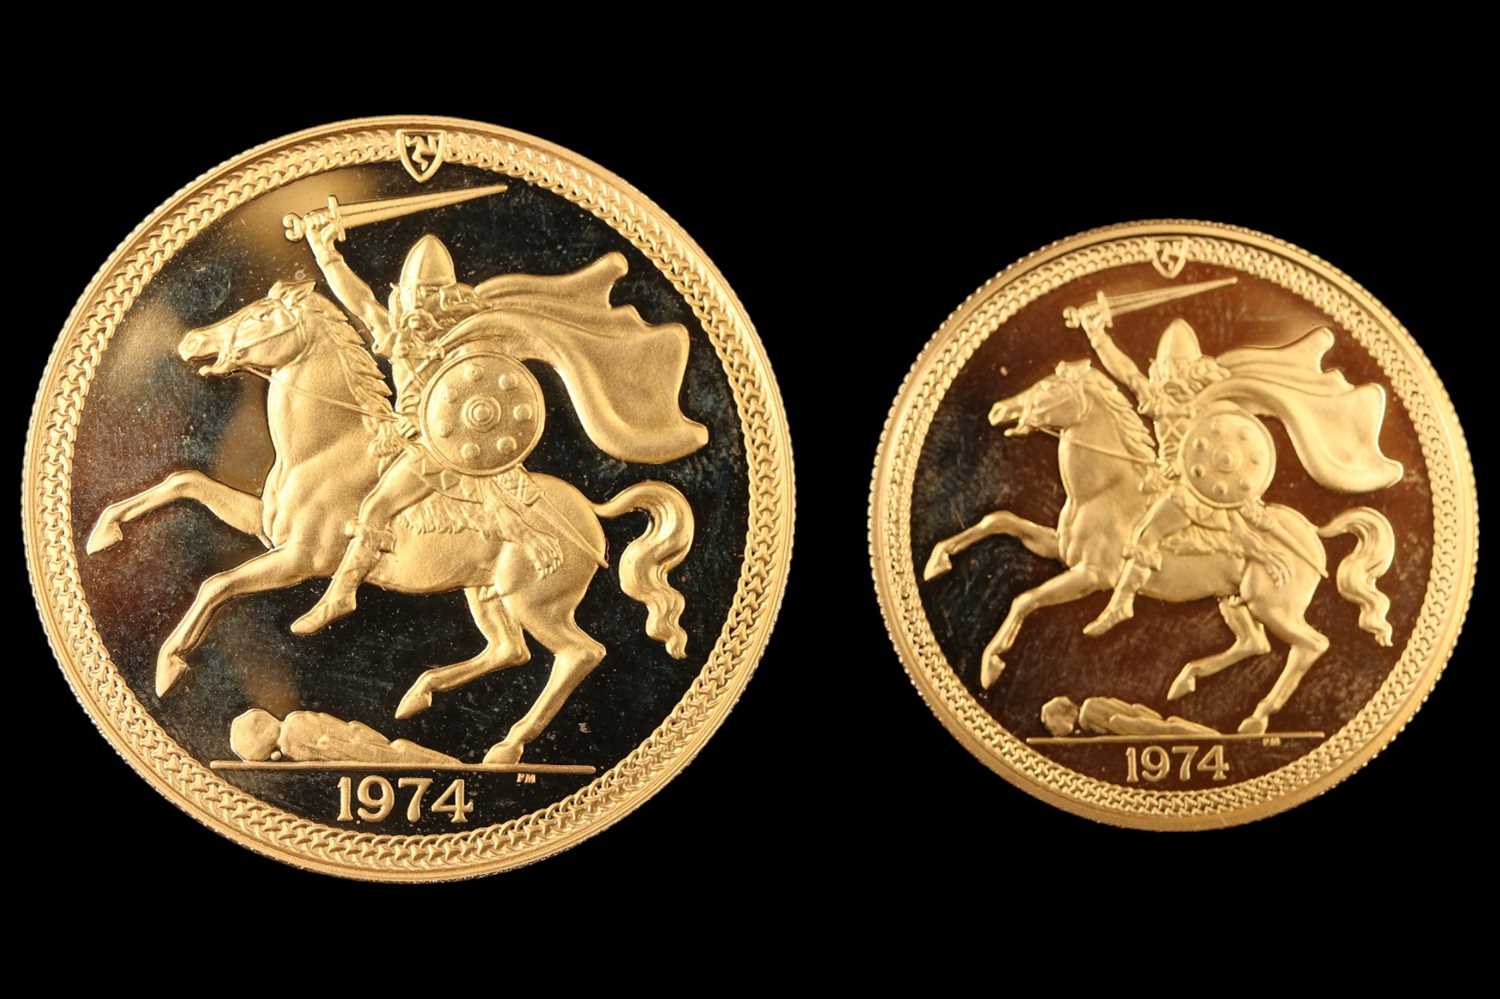 An Elizabeth II 1974 limited edition Isle of Man gold coin proof set, including £5, £2, sovereign - Image 3 of 6